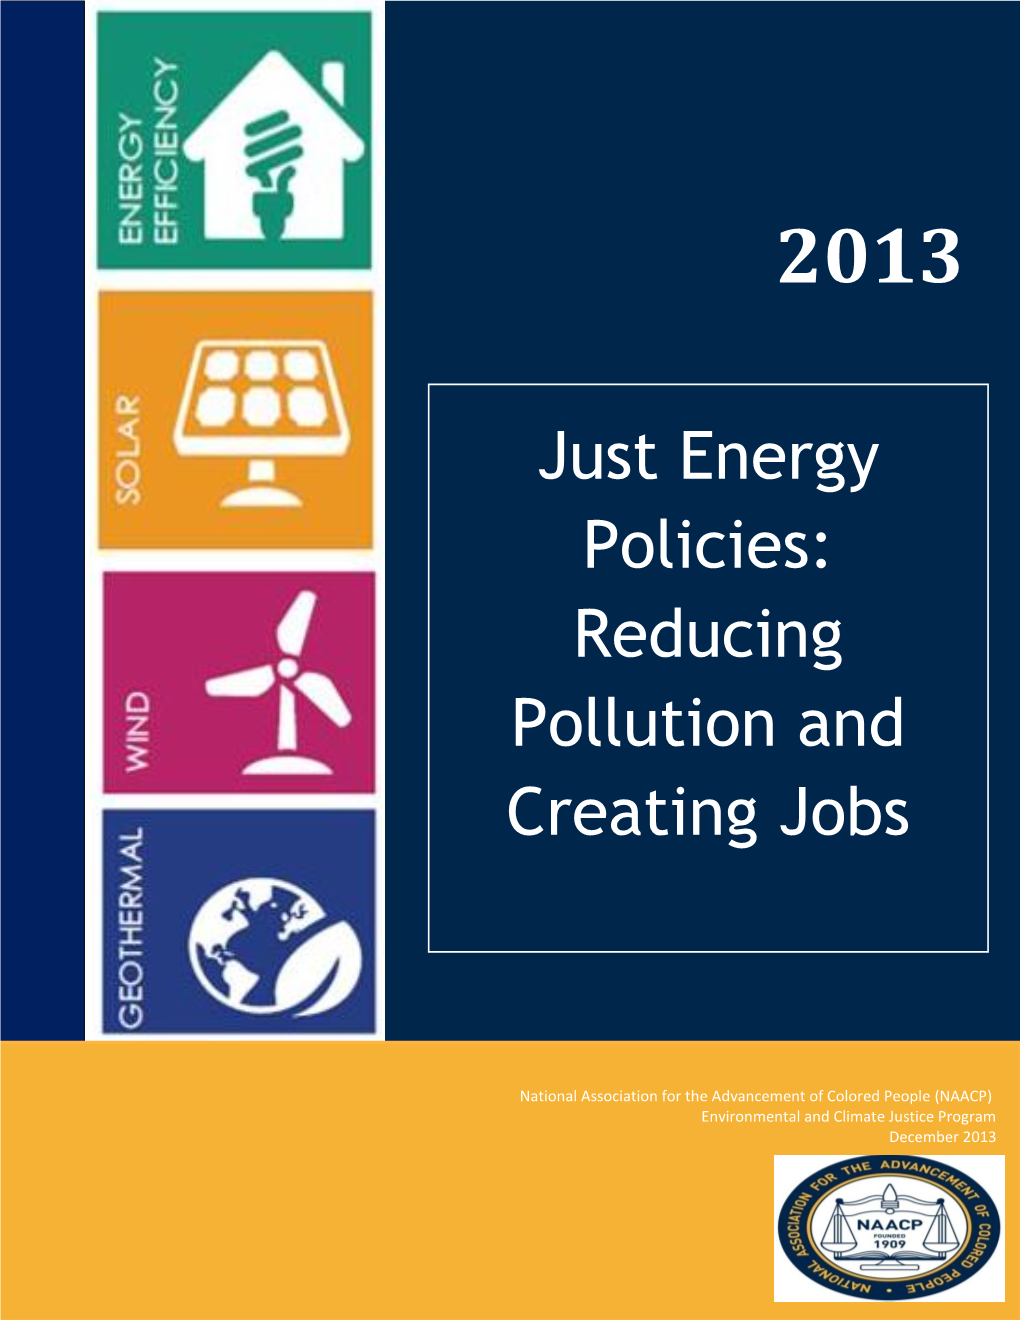 Just Energy Policies: Reducing Pollution and Creating Jobs